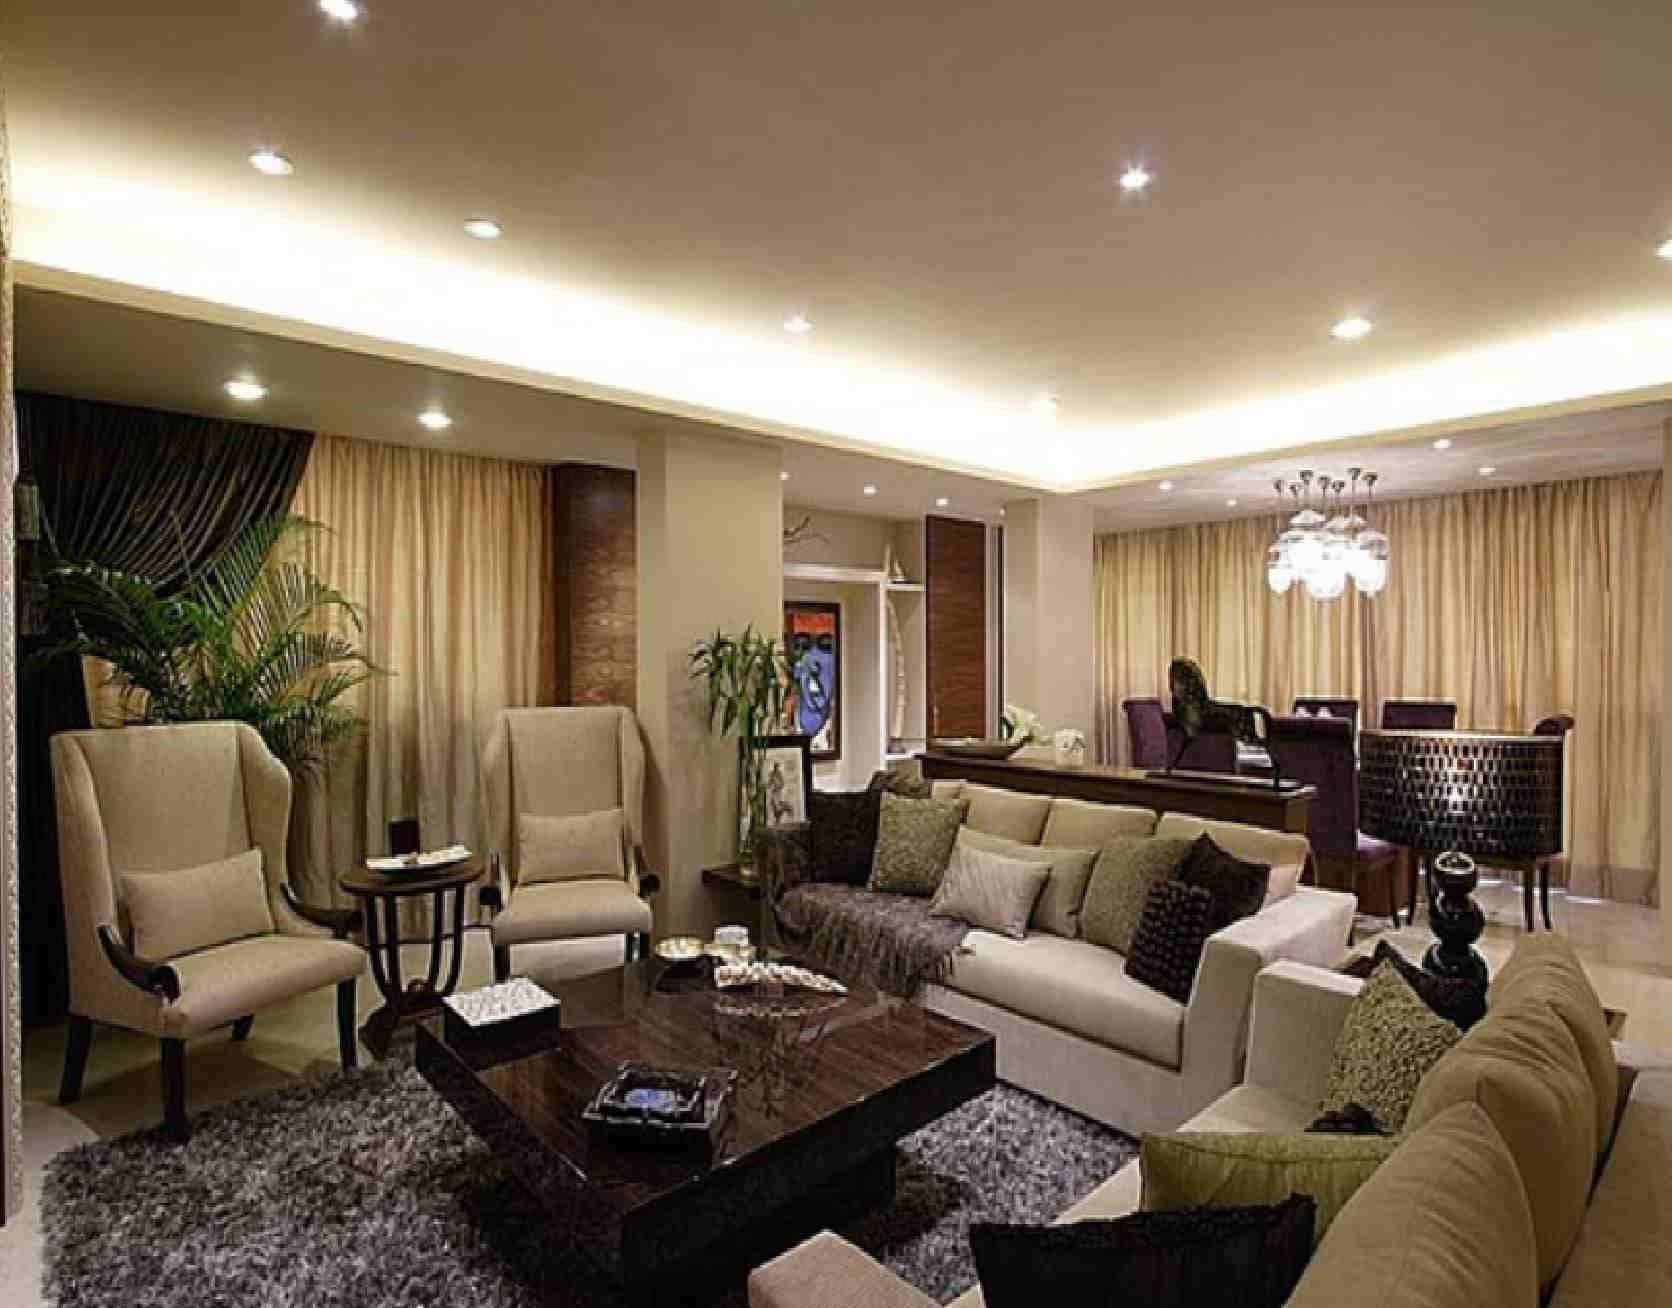 10 Fantastic Large Living Room Decorating Ideas living room how to decorate a living room elegant design any 2022